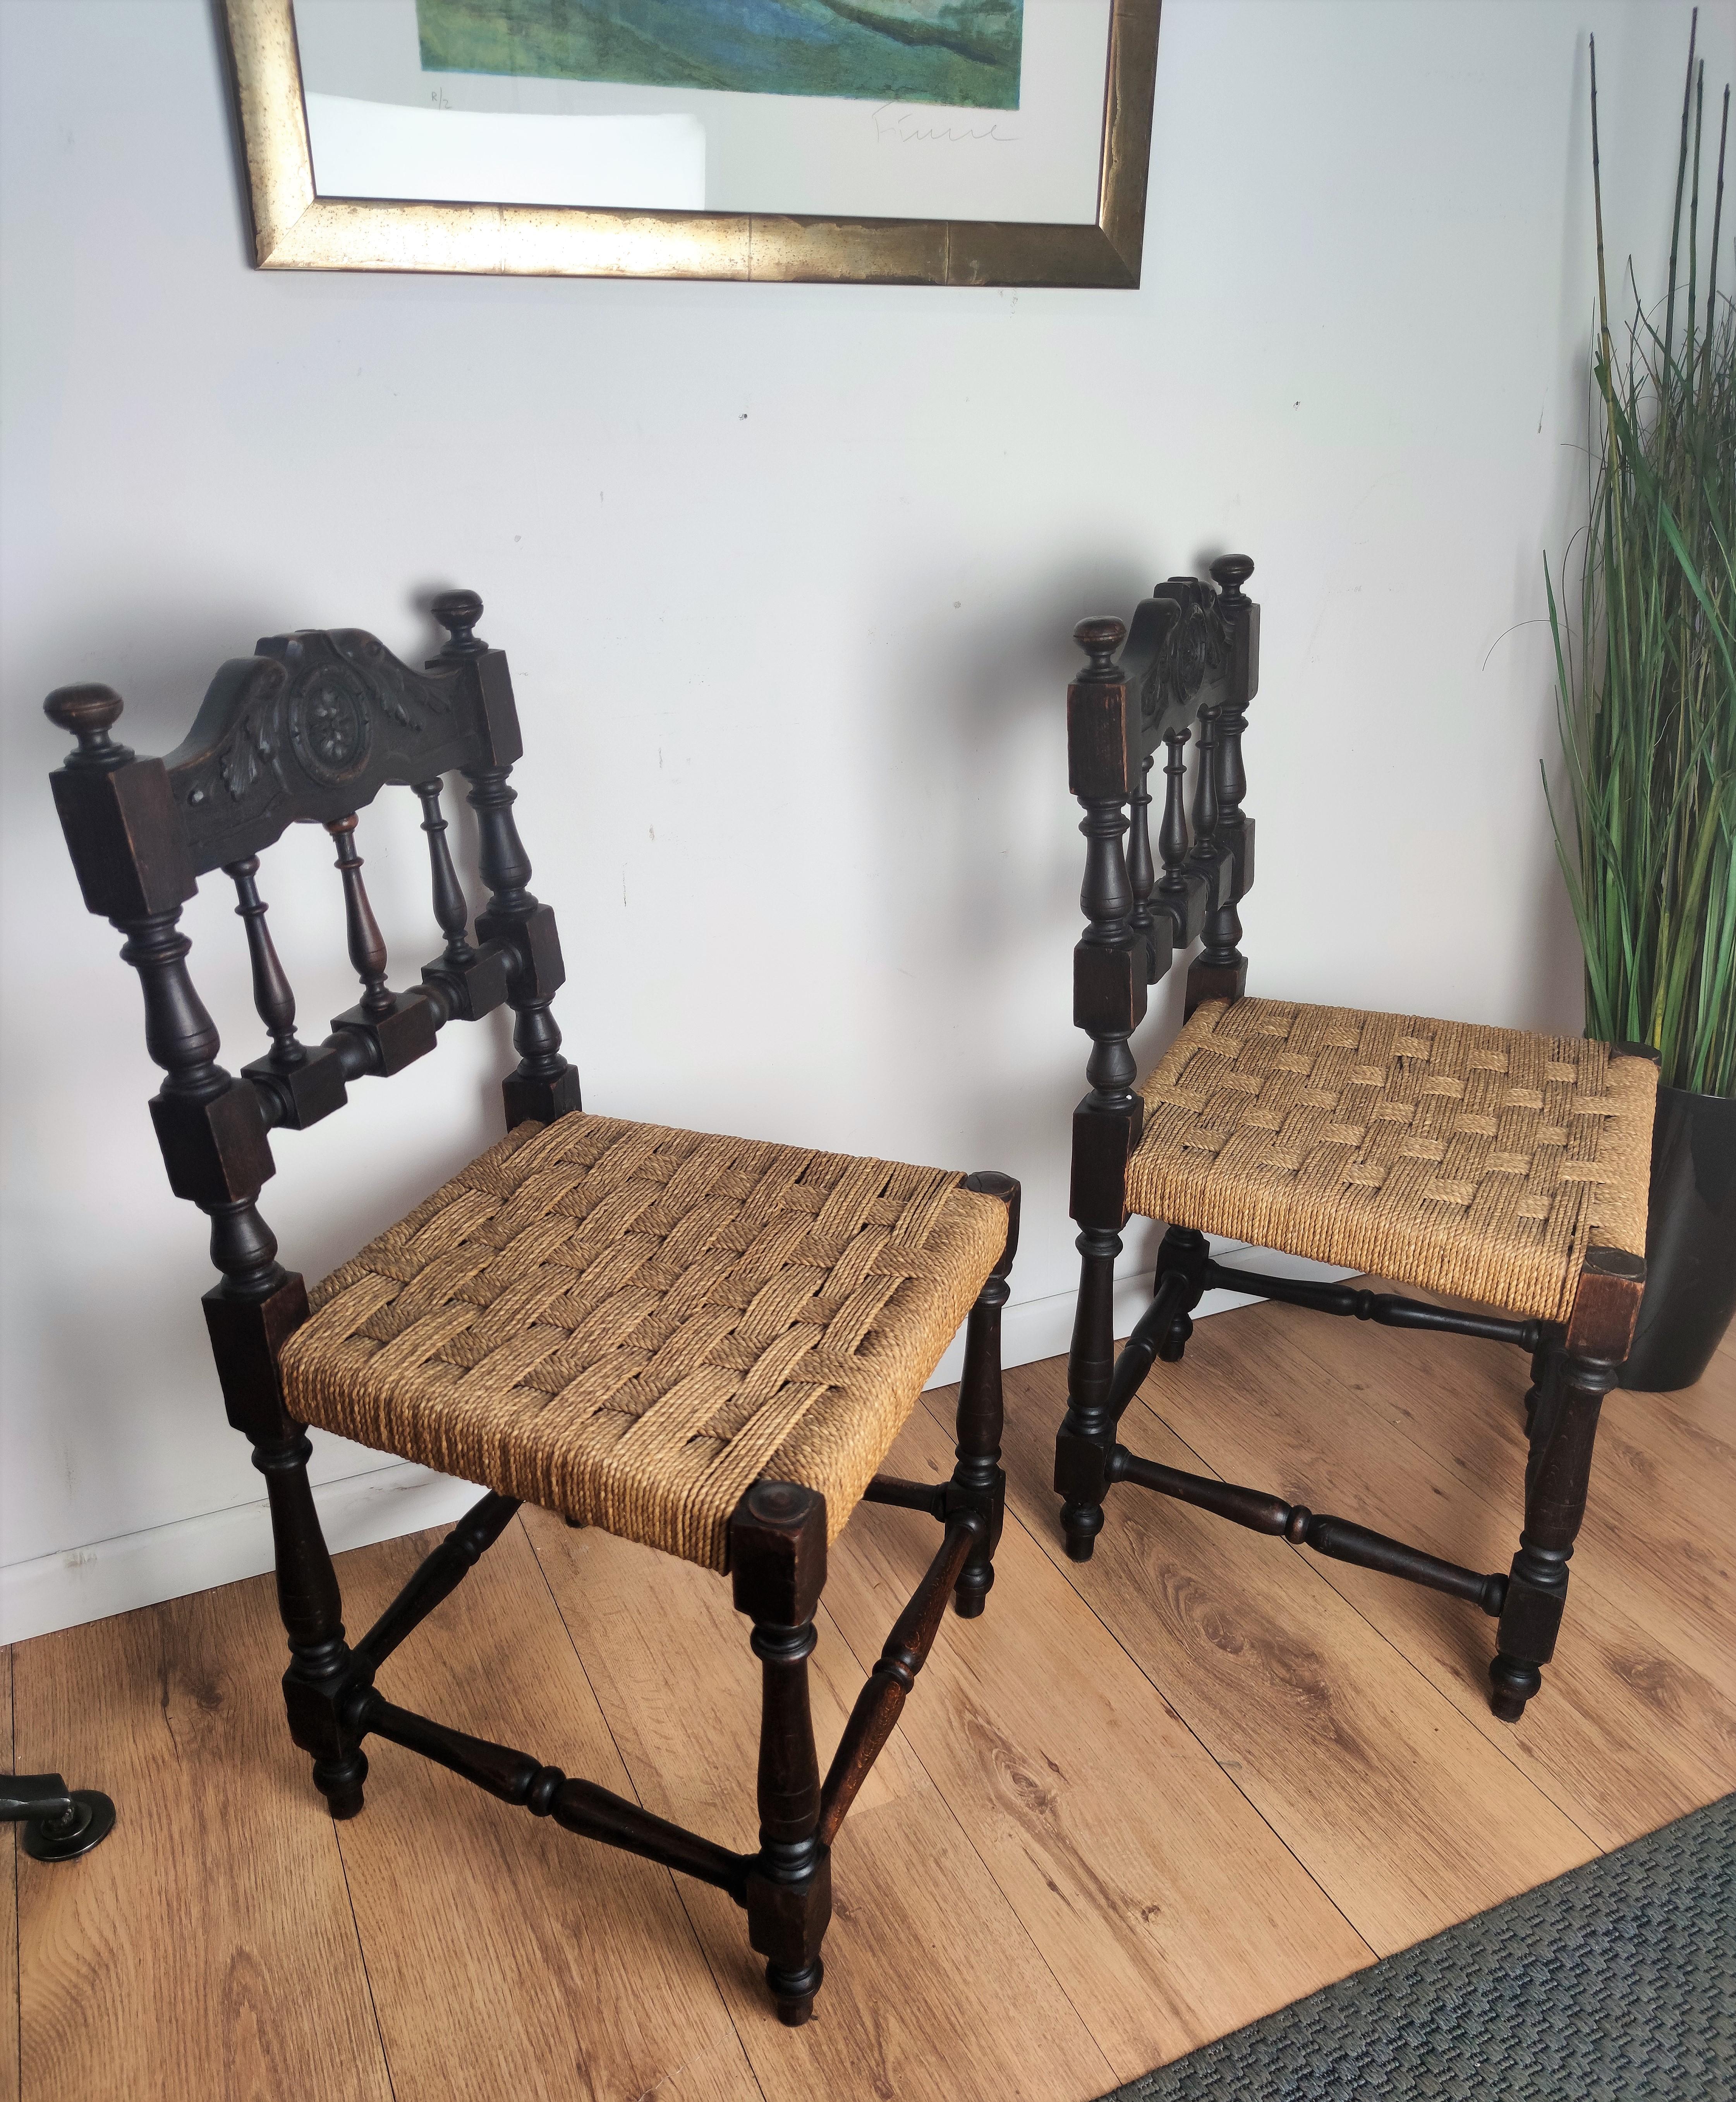 Pair of 1960s Italian Midcentury Carved Wood and Cord Woven Rope Chairs Stools For Sale 2